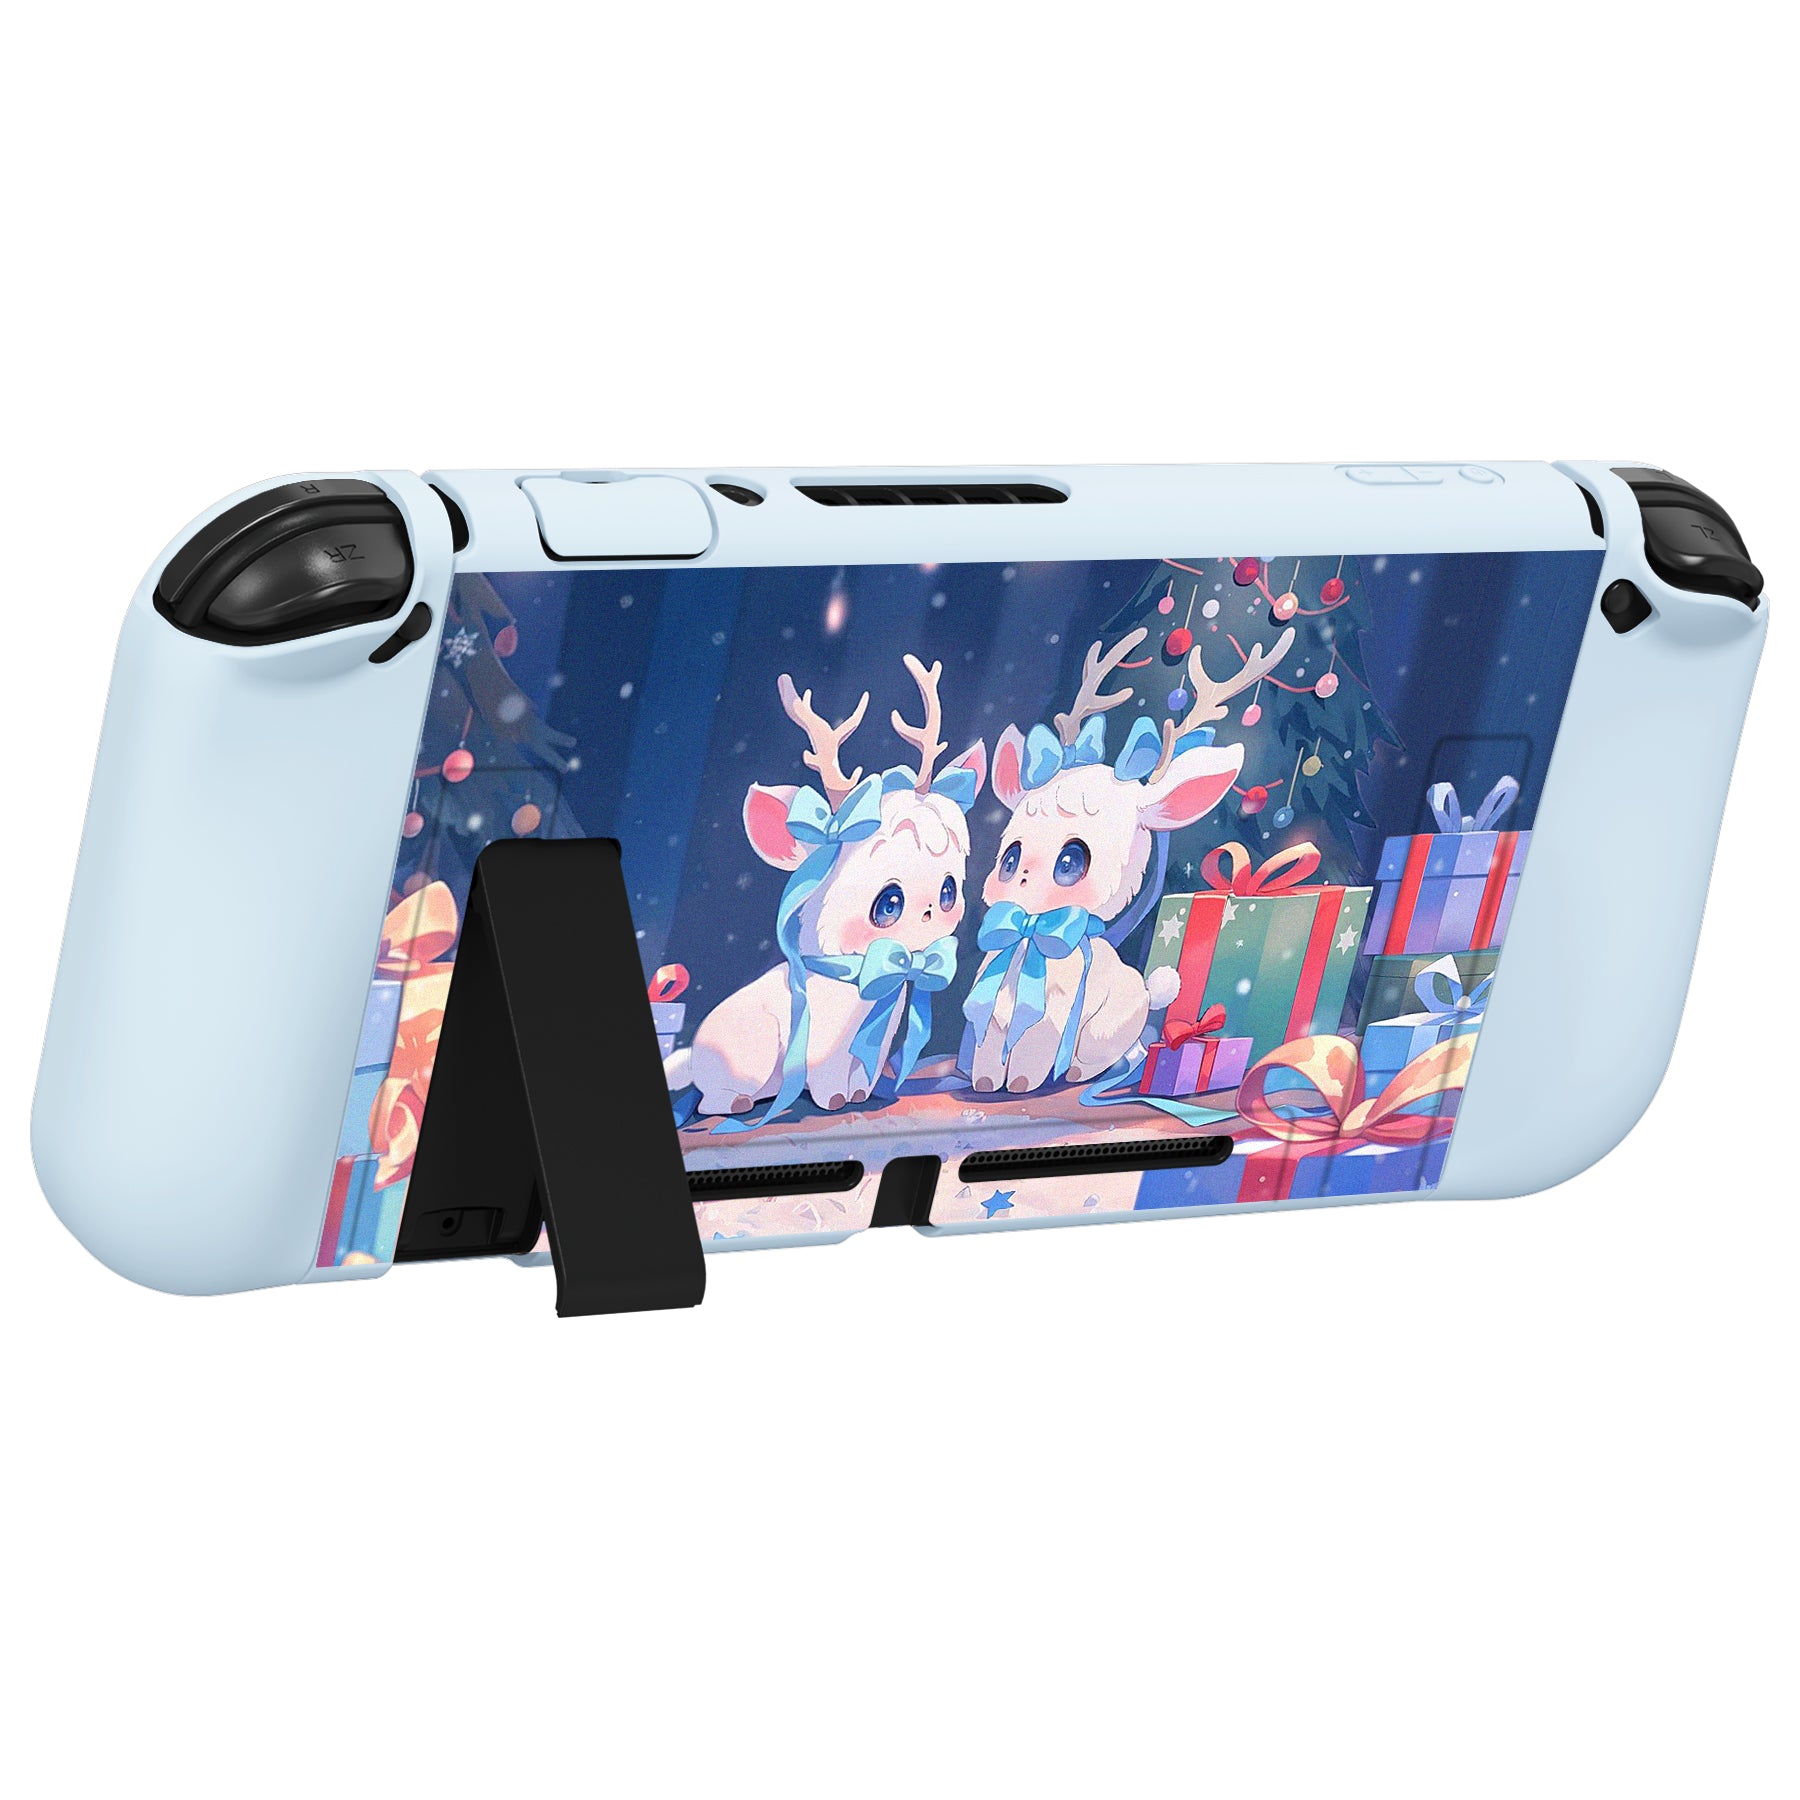 PlayVital ZealProtect Soft Protective Case for Nintendo Switch, Flexible Cover for Switch with Tempered Glass Screen Protector & Thumb Grips & ABXY Direction Button Caps - Santa Deer - RNSYV6052 playvital